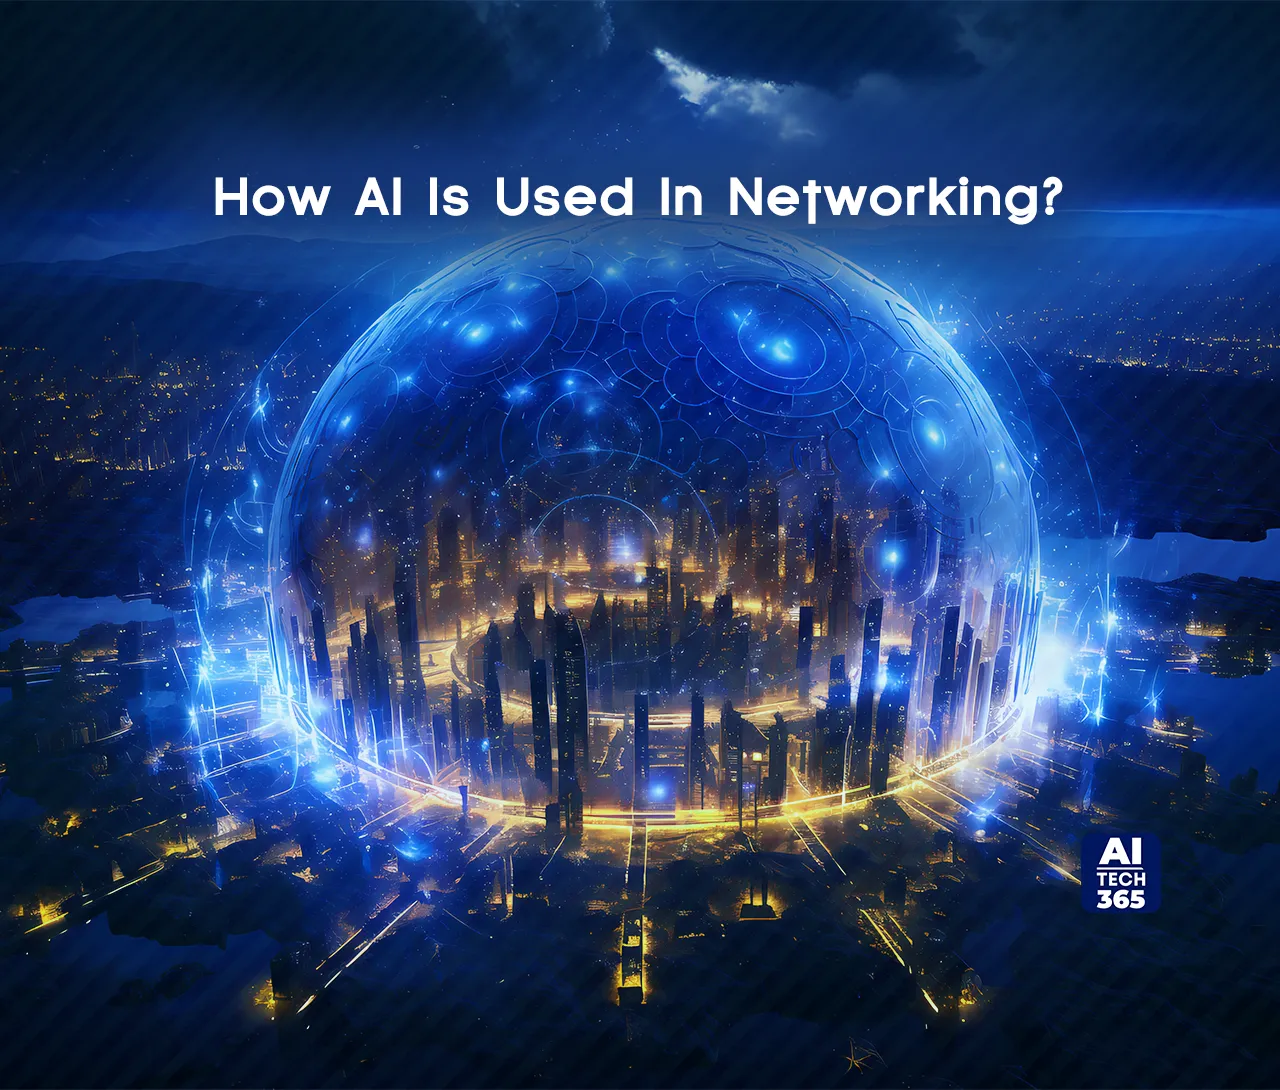 Artificial Intelligence (AI) in Networking